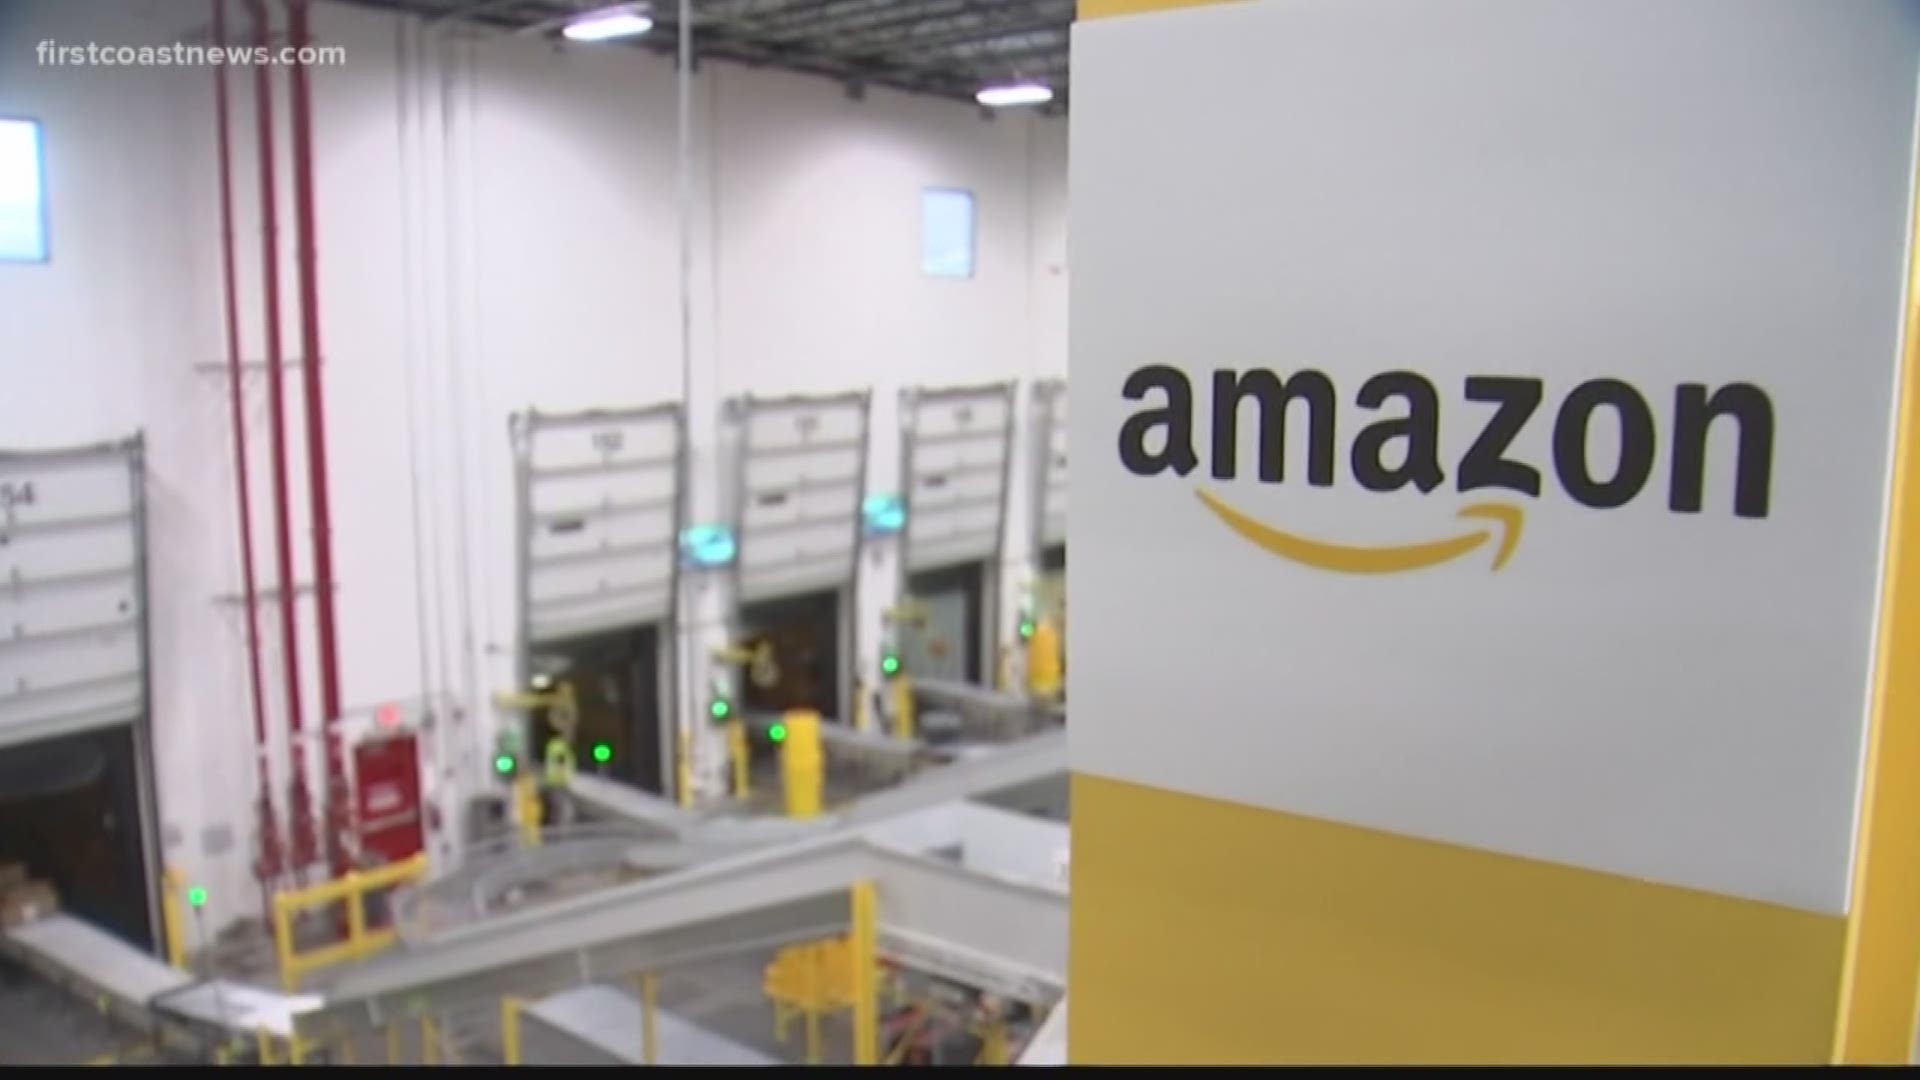 Amazon says employees at the JAX2 site on Pecan Park Road have been made aware of the confirmed case and the company has implemented several preventive measures.